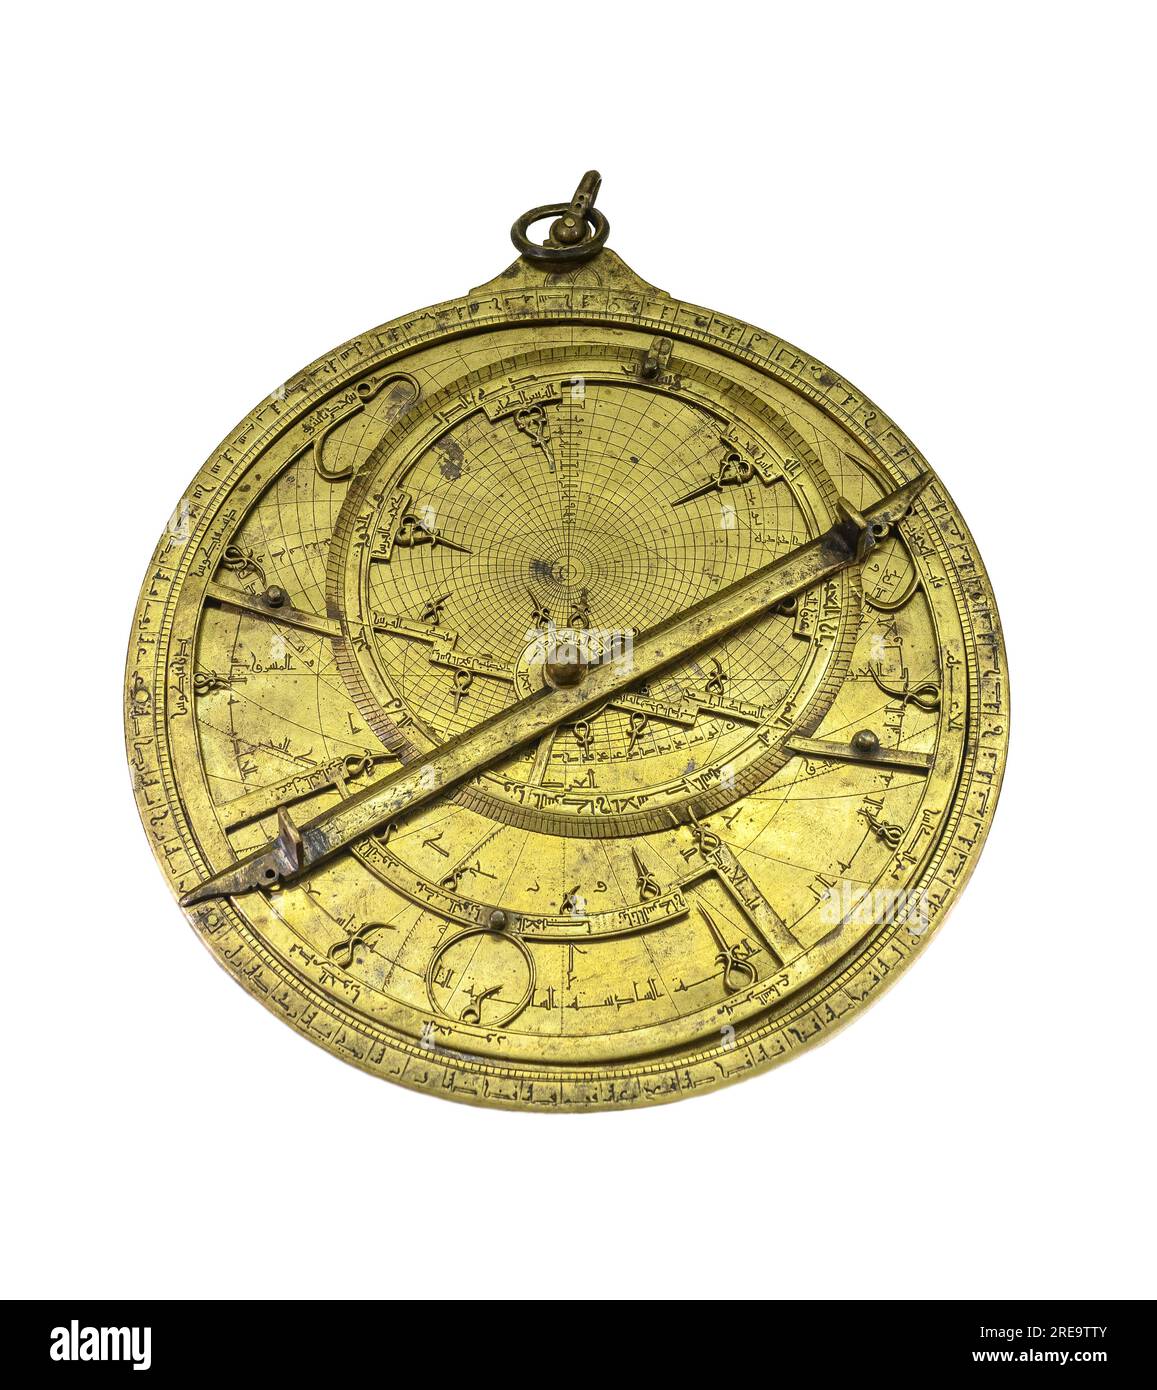 A 13th cen. Planispheric Astrolabe. inscribed with the date 1217. and made by Muhammad b. Omar b. Jaafar ai-Karmani,  year 714 after Hira. Made of Bra Stock Photo